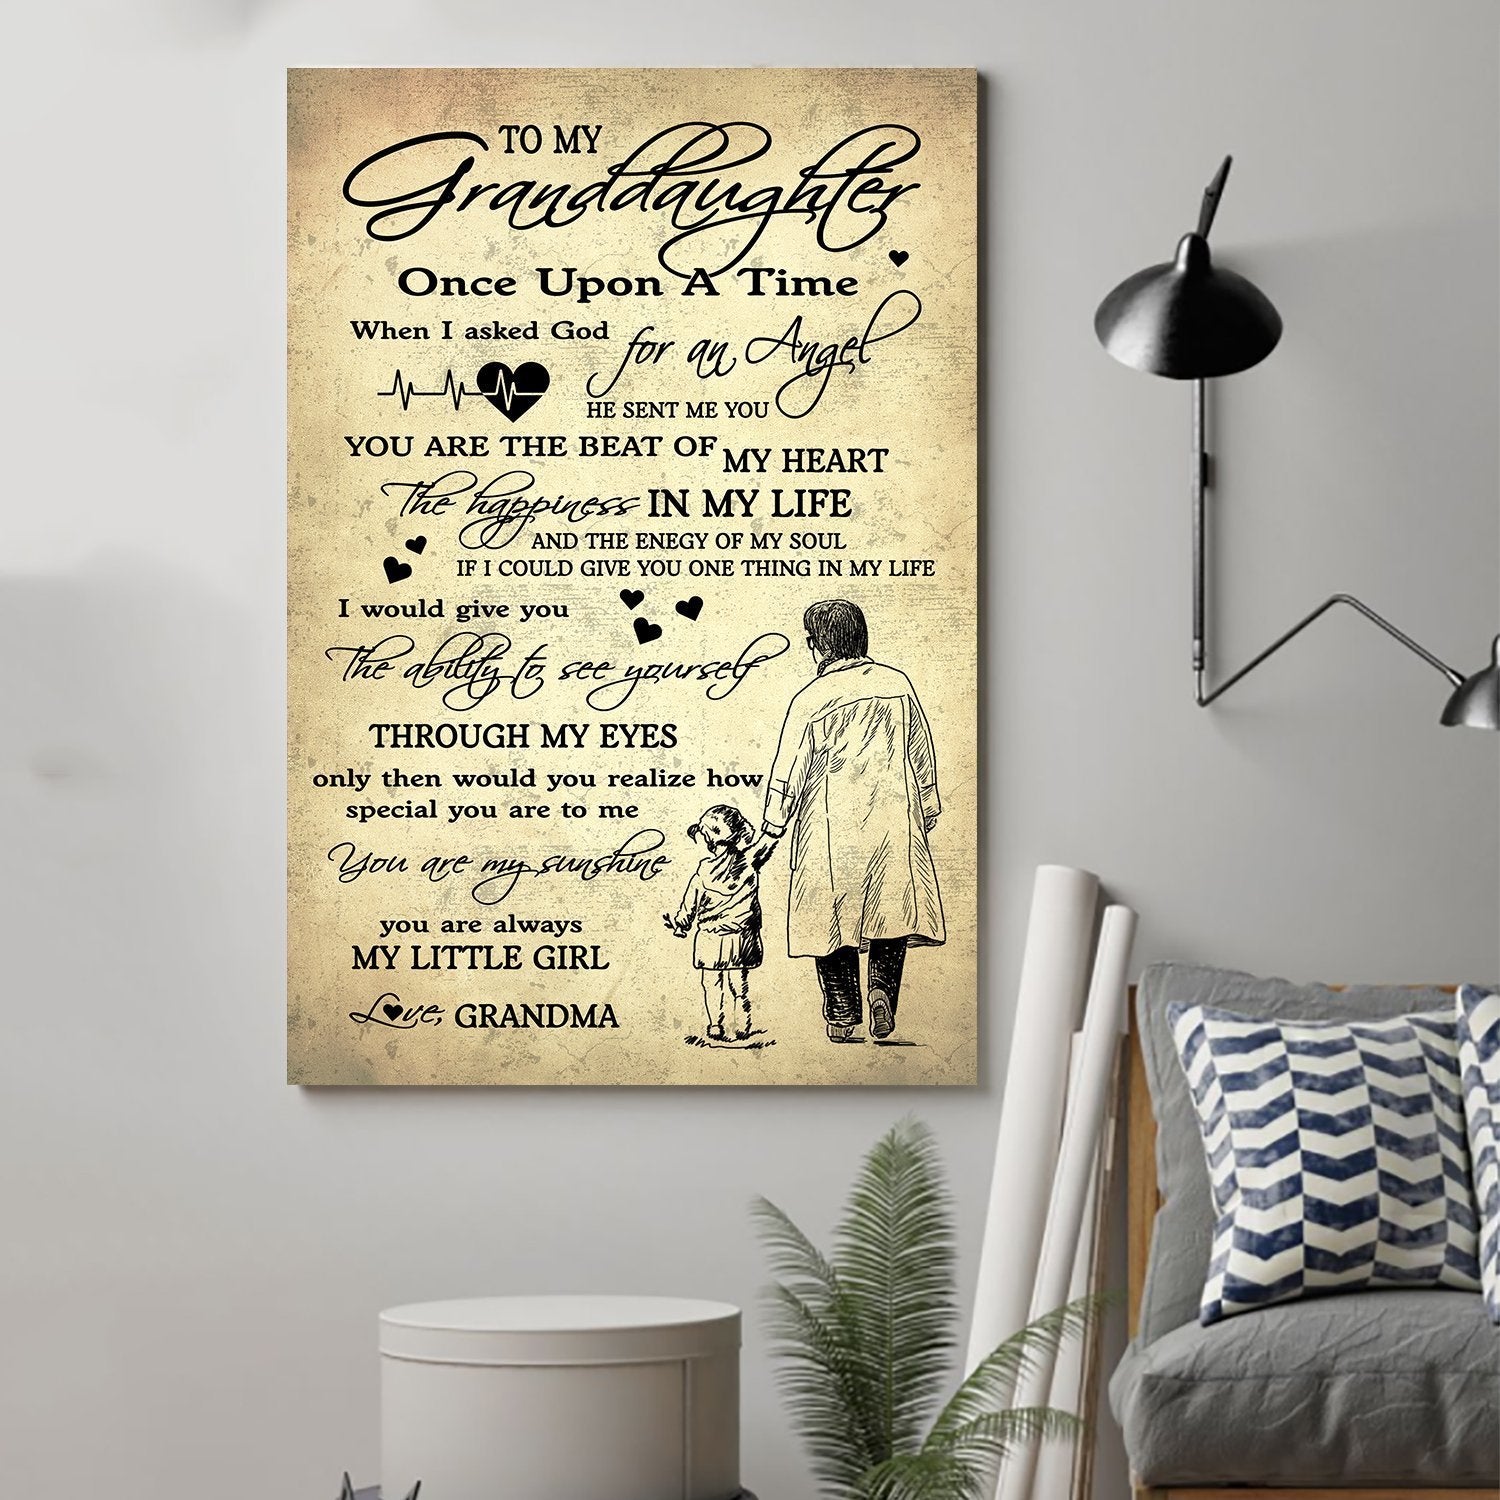 Family Canvas and Poster ��� To my granddaughter ��� Once upon a time wall decor visual art - GIFTCUSTOM